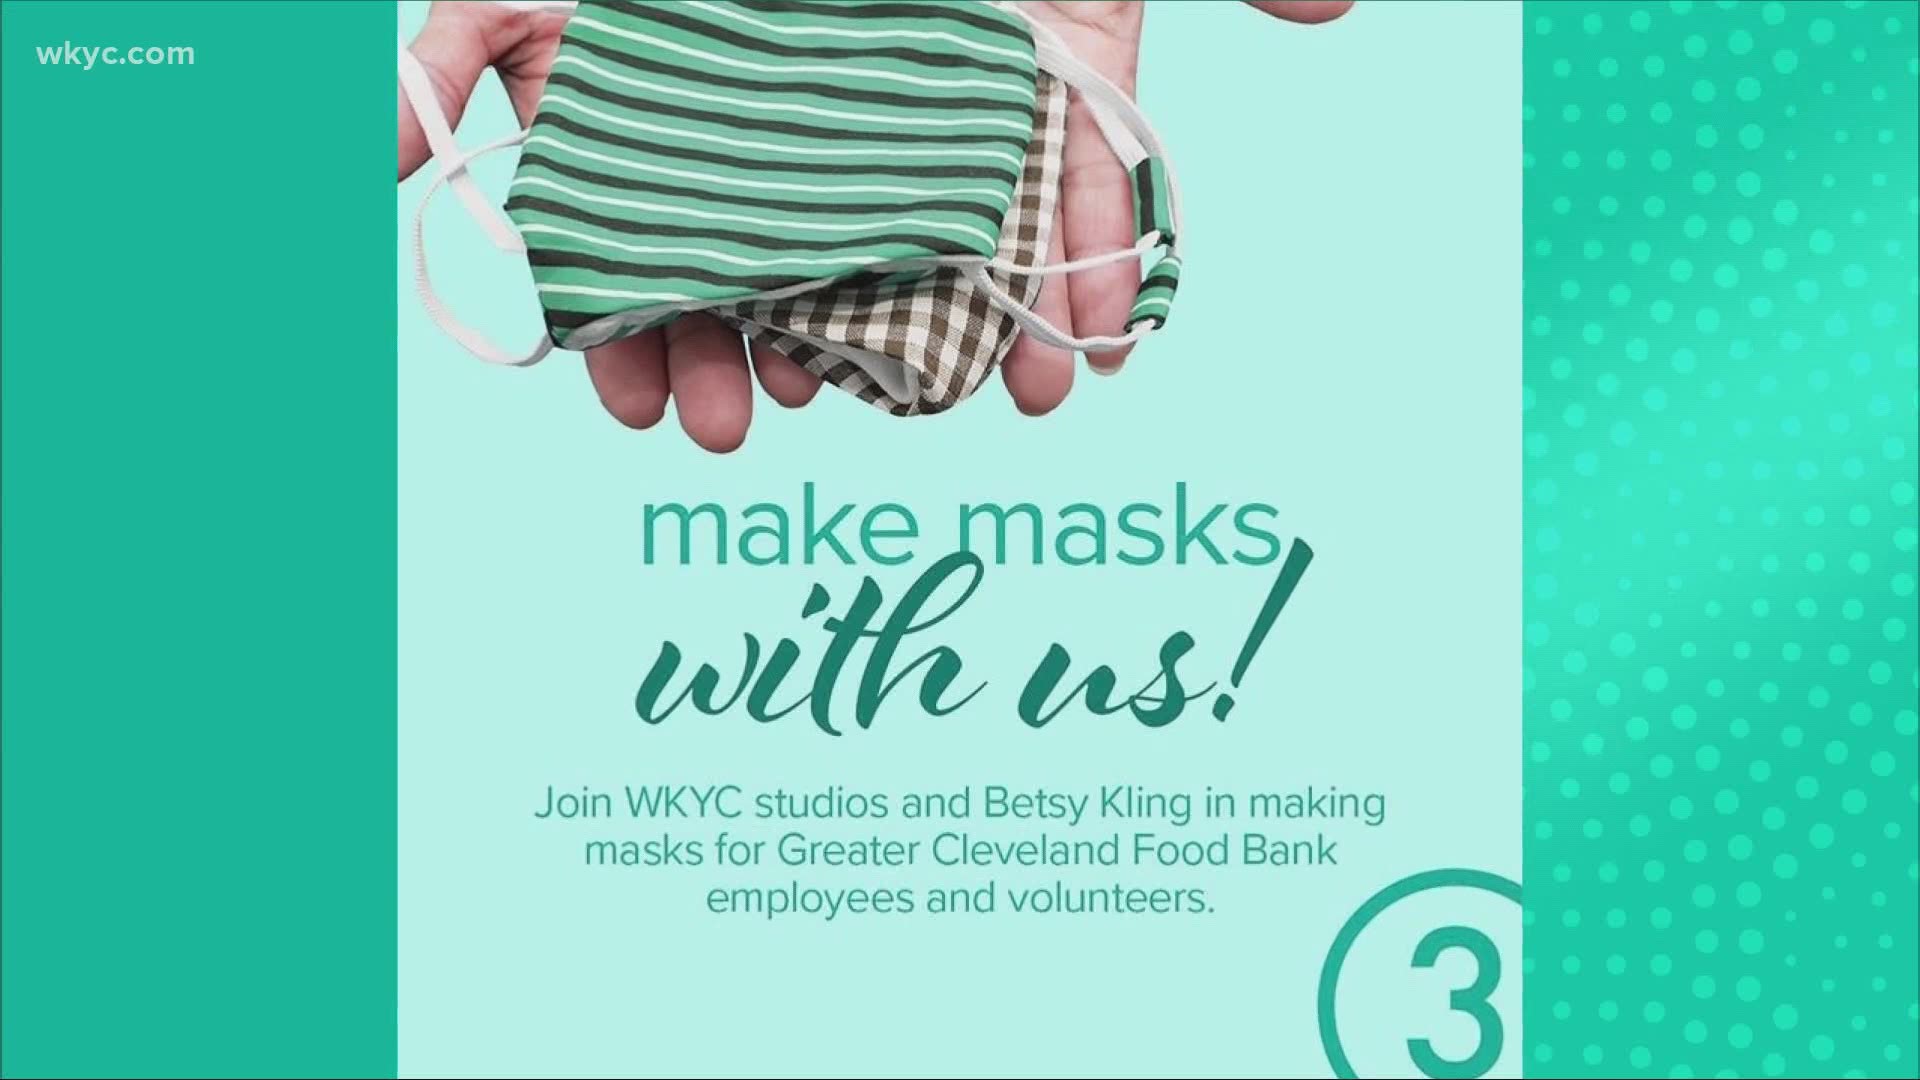 To our viewers across Northeast Ohio who know how to sew: We need your help. Join Betsy Kling today!